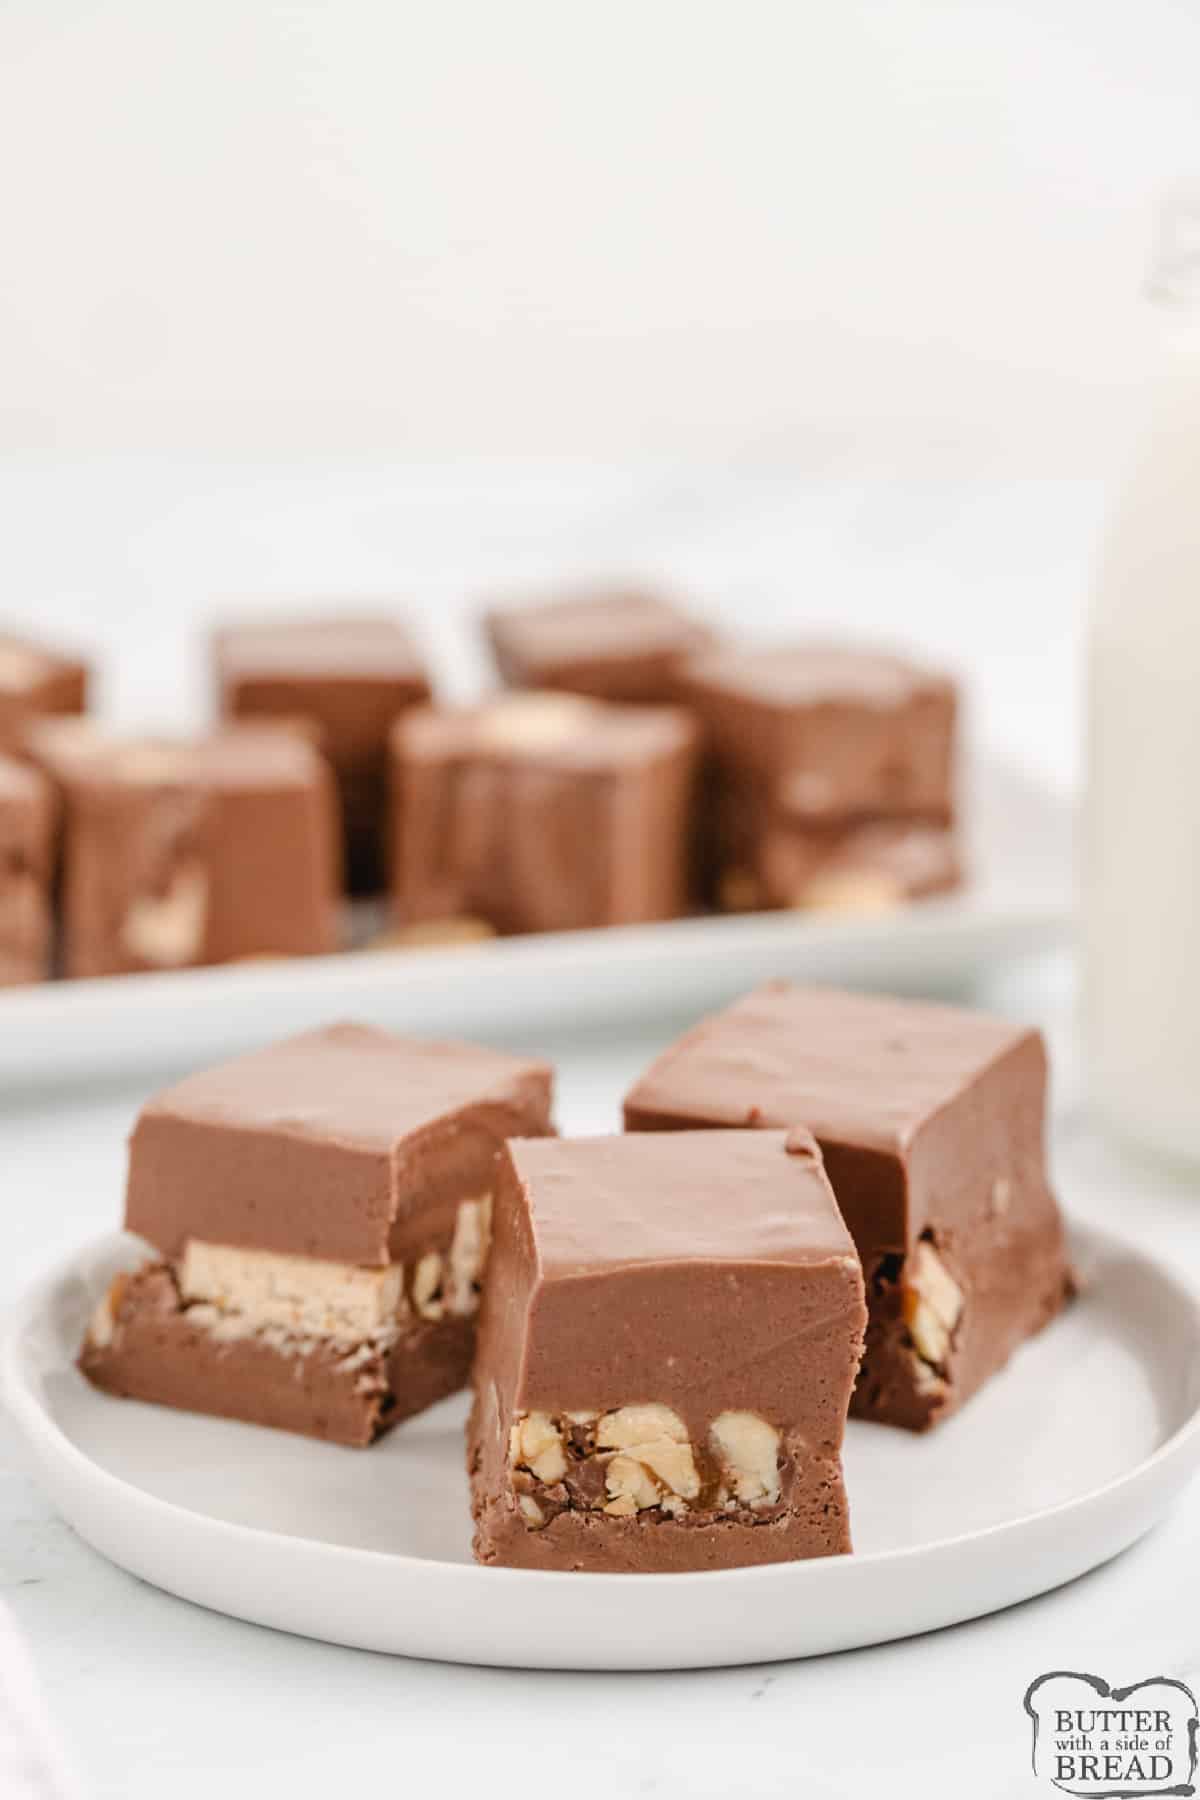 Chocolate fudge with Snickers bars in the middle. 